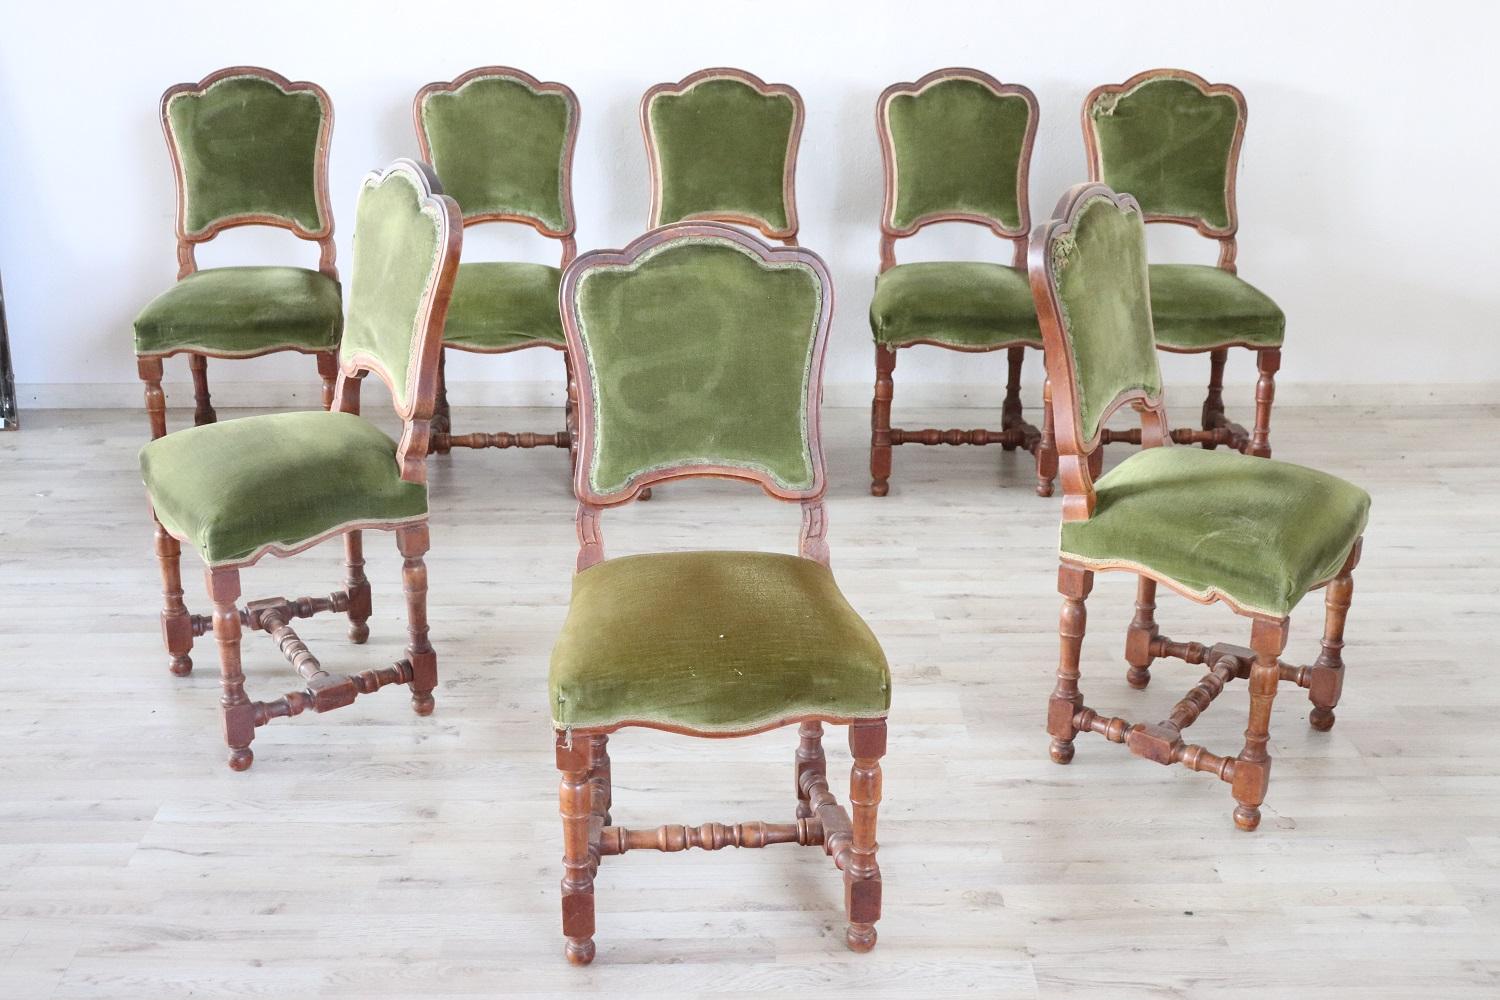 Series of eight refined late 19th century Italian walnut wood chairs 1880s. Refined decoration the back is carved. The legs are very elegant with turned walnut wood. The seat is wide and comfortable. The velvet lining is used see photos. Necessary